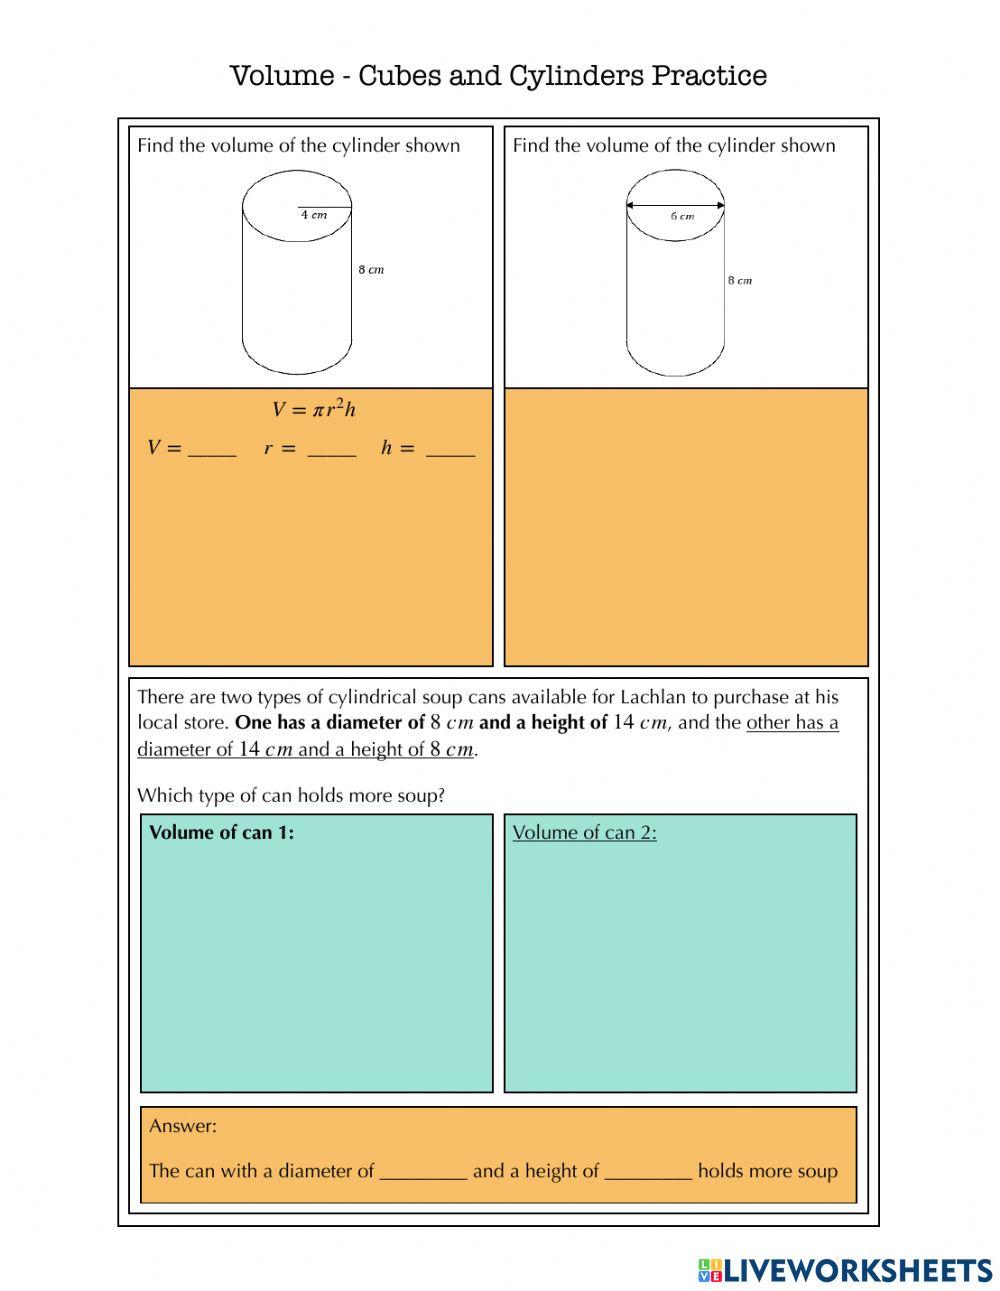 Volume - Cube and Cylinders Practice